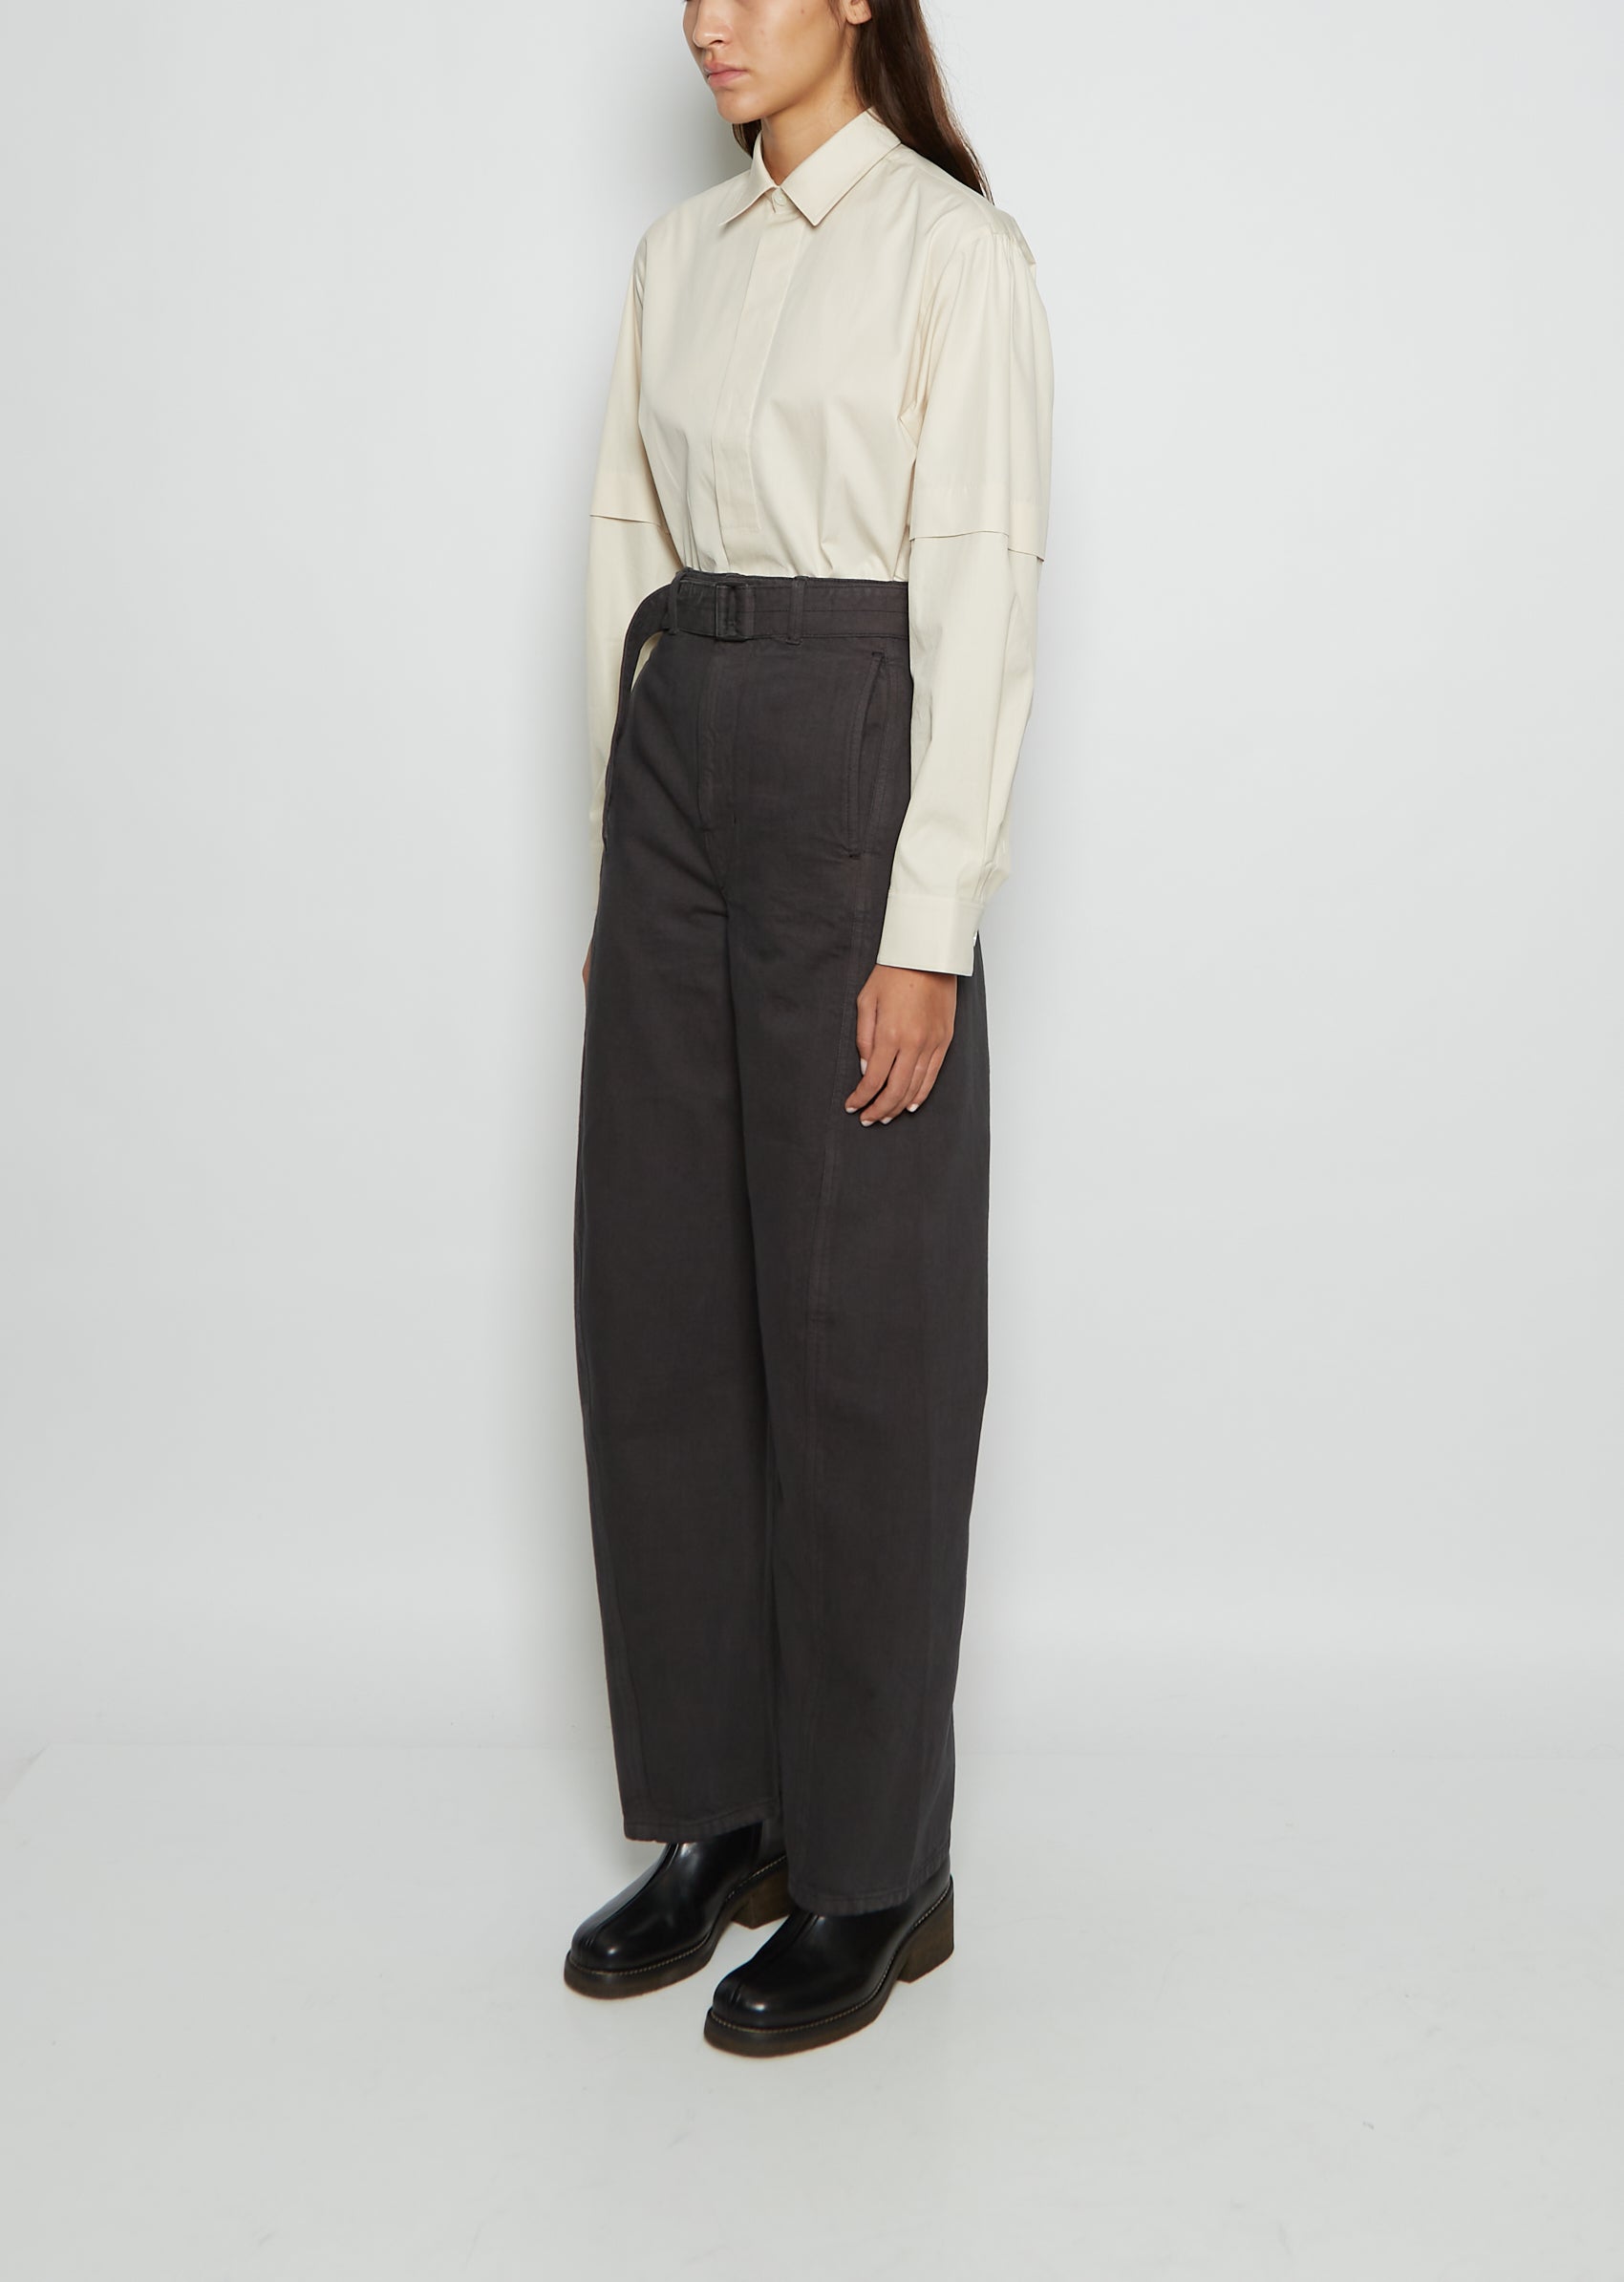 Lemaire Twisted Belted Pants - Denim Snow Grey